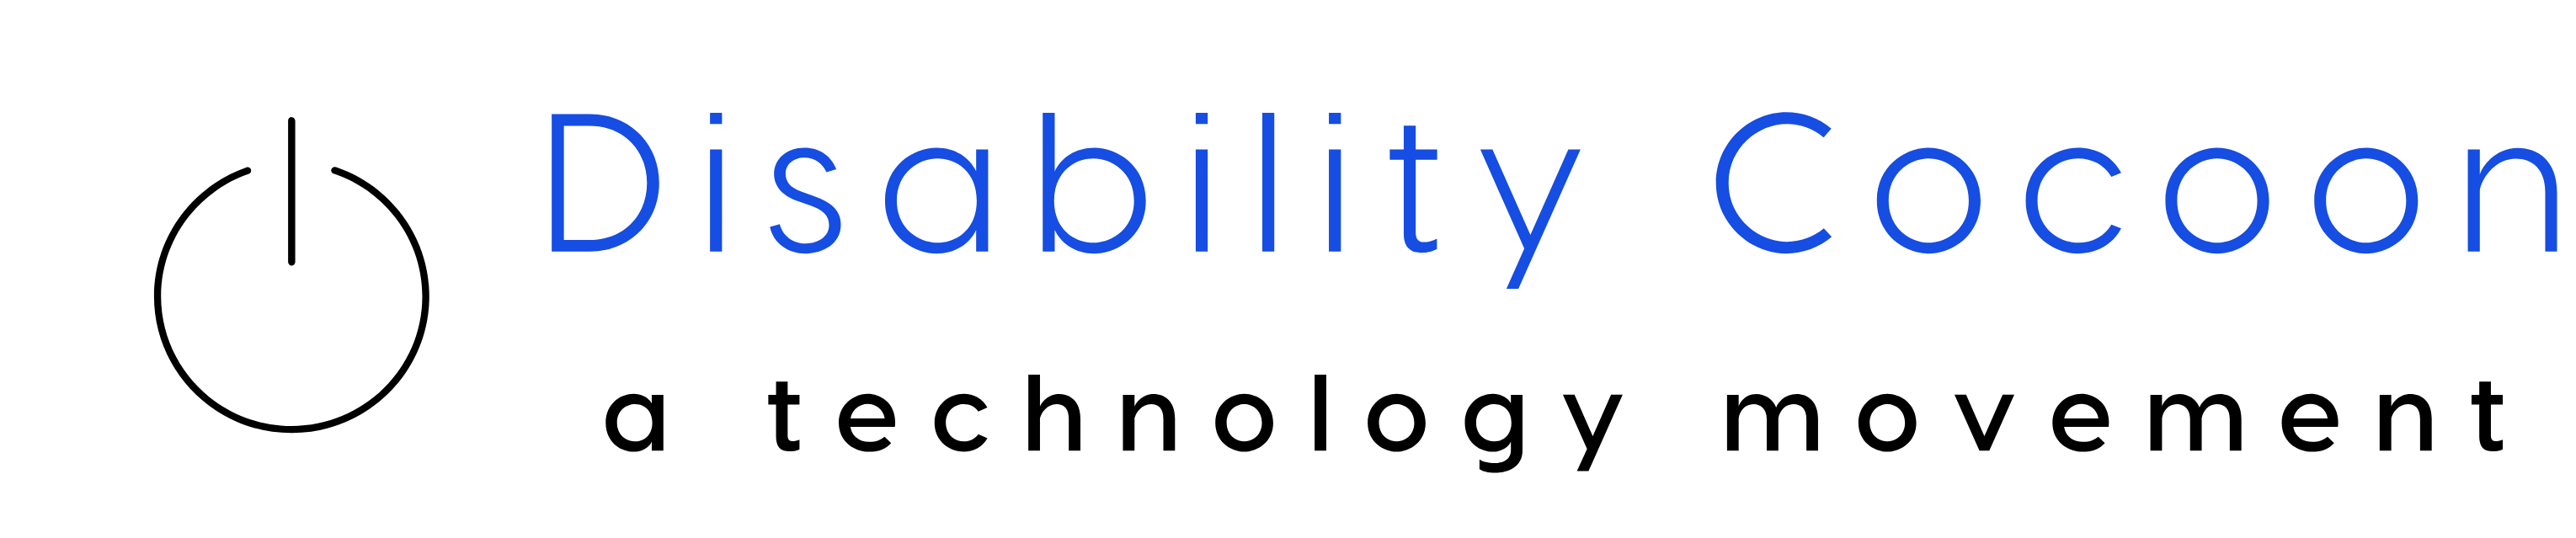 disability cocoon logo